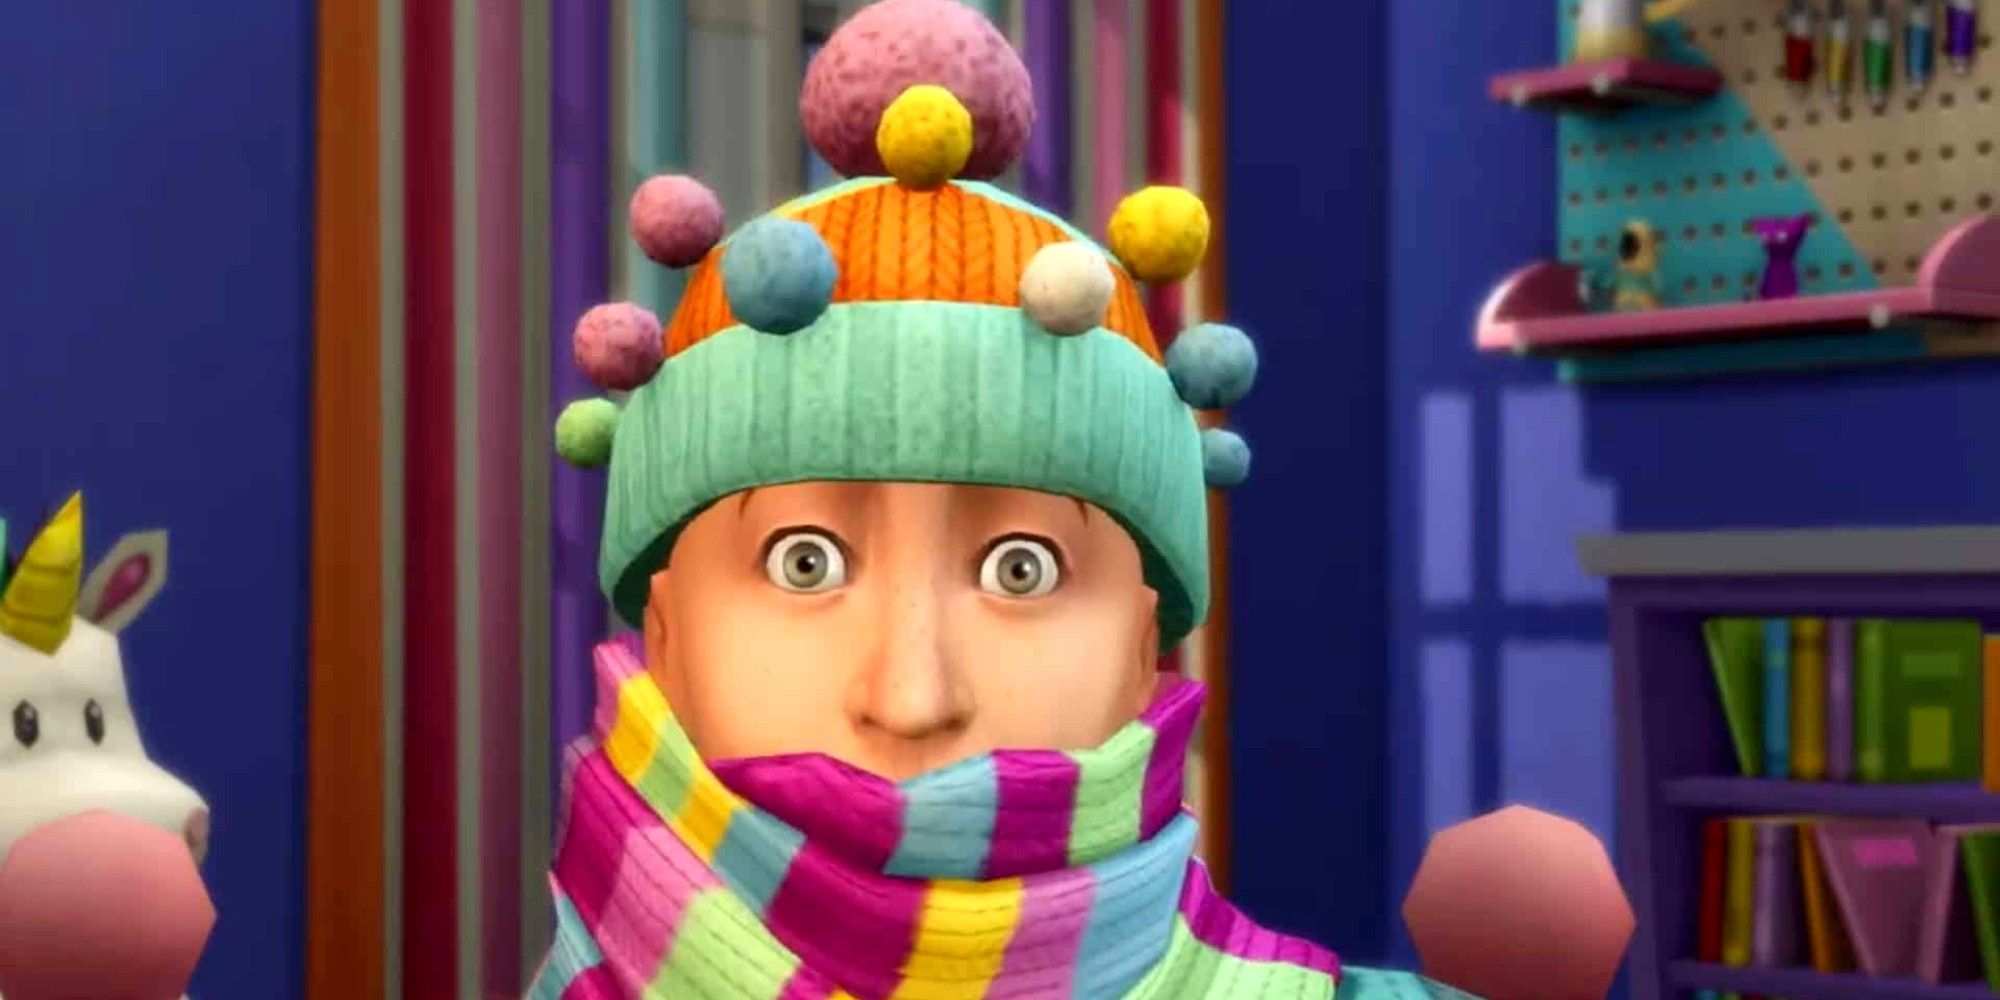 A Sim dressed in knits in The Sims 4: Nifty Knitting Stuff Pack